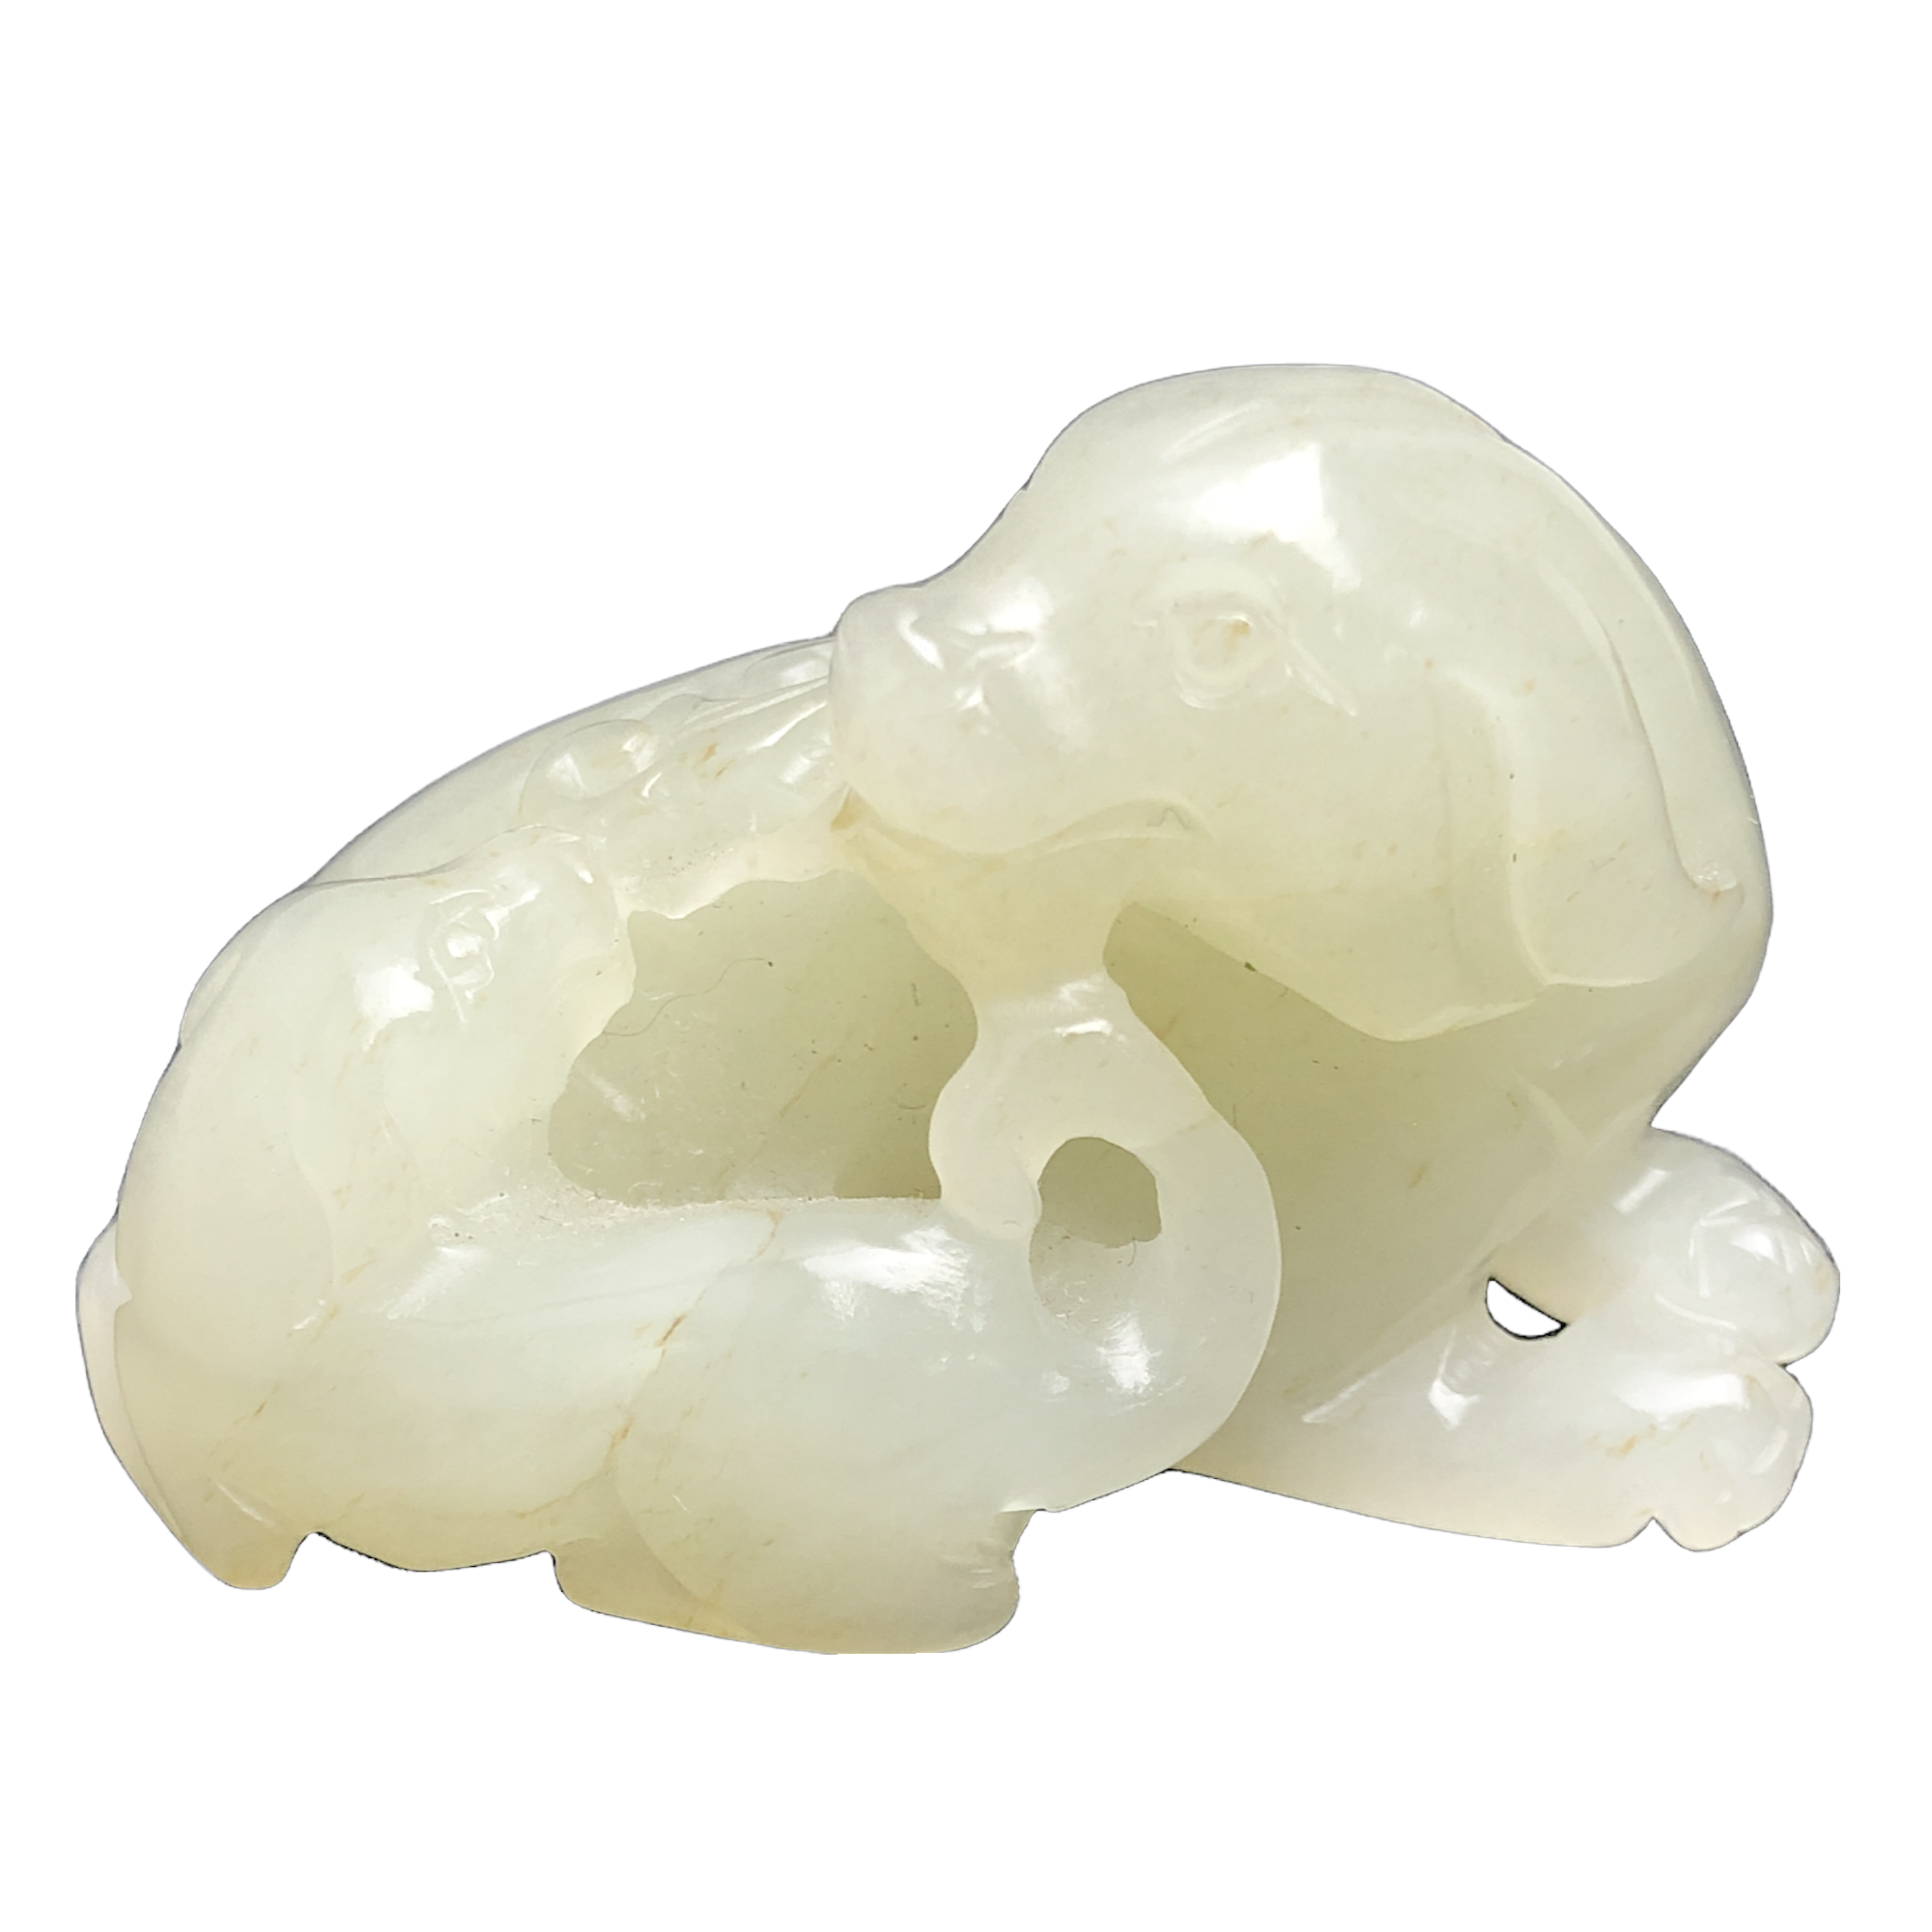 Chinese White Jade Carving of Two Badgers, Ching Dynasty, L:5cm